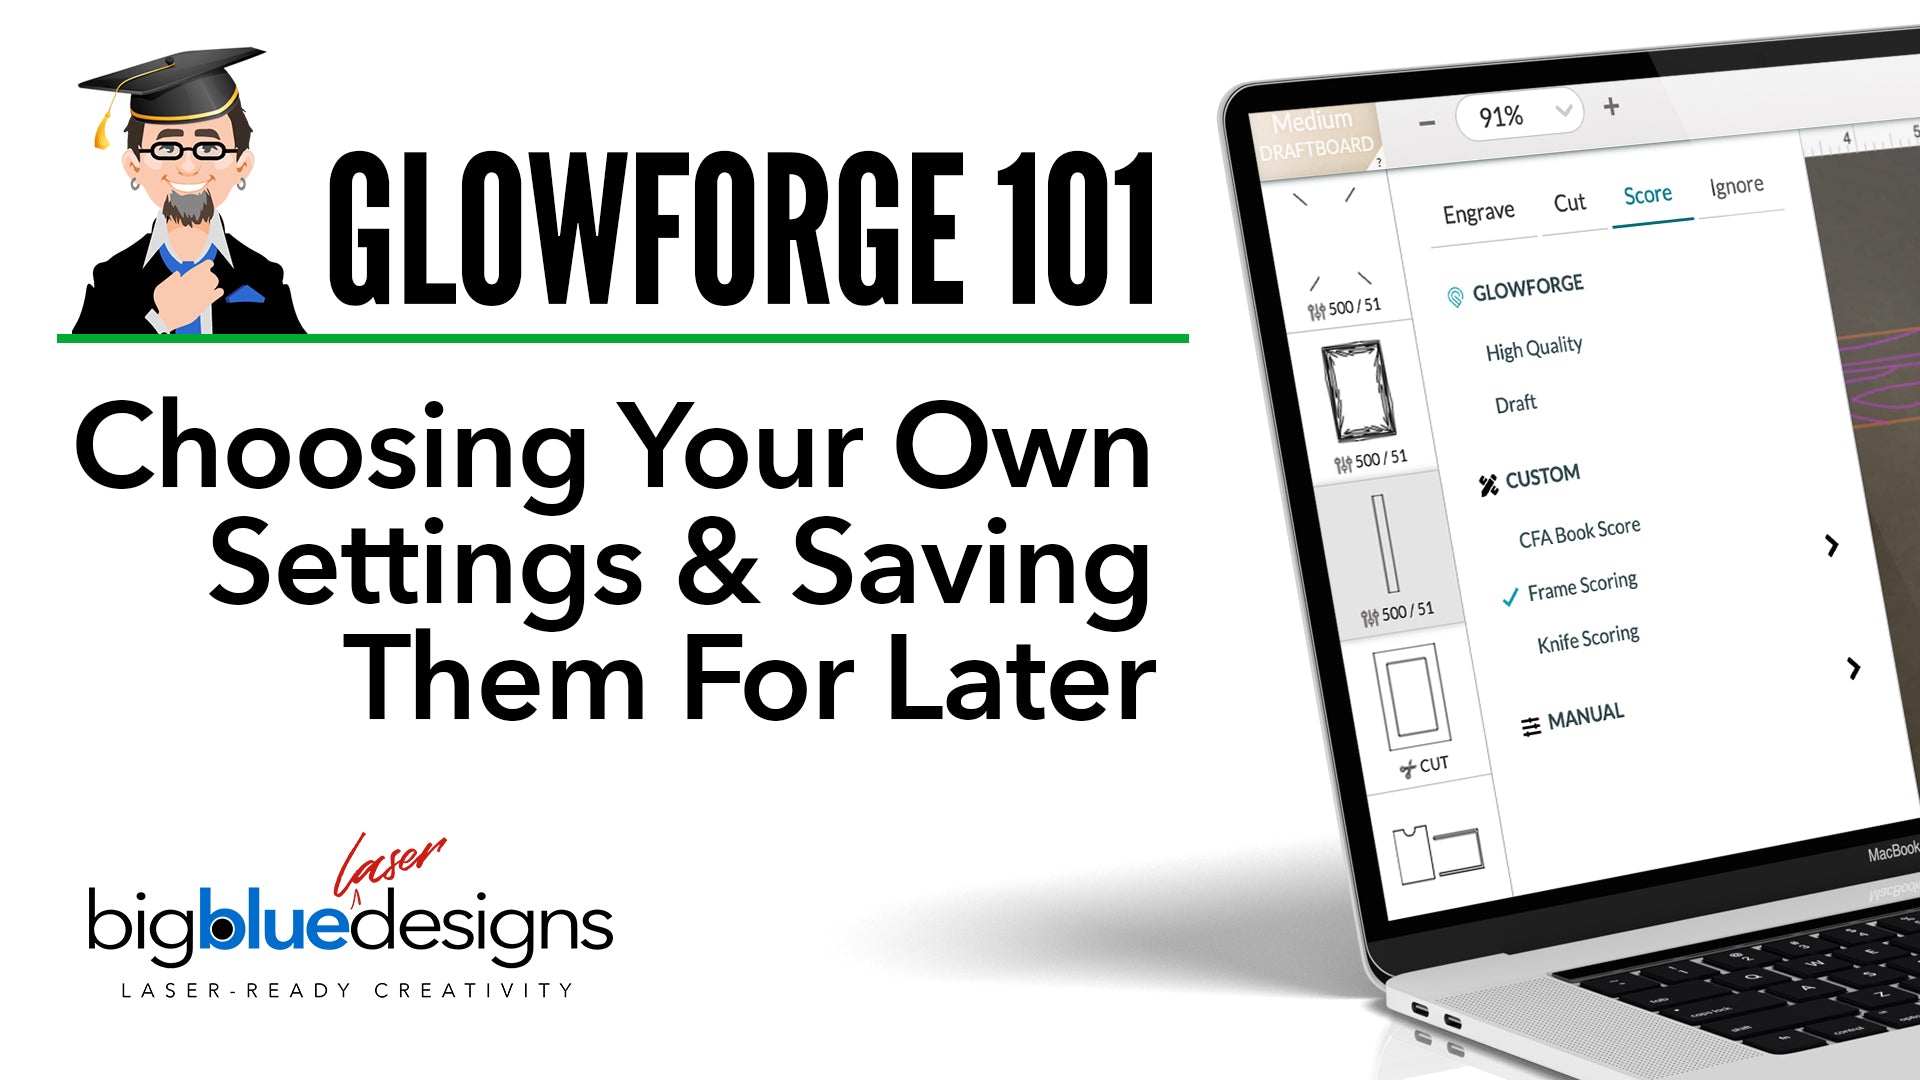 Glowforge 101: Choosing Your Own Settings and Saving Them For Later